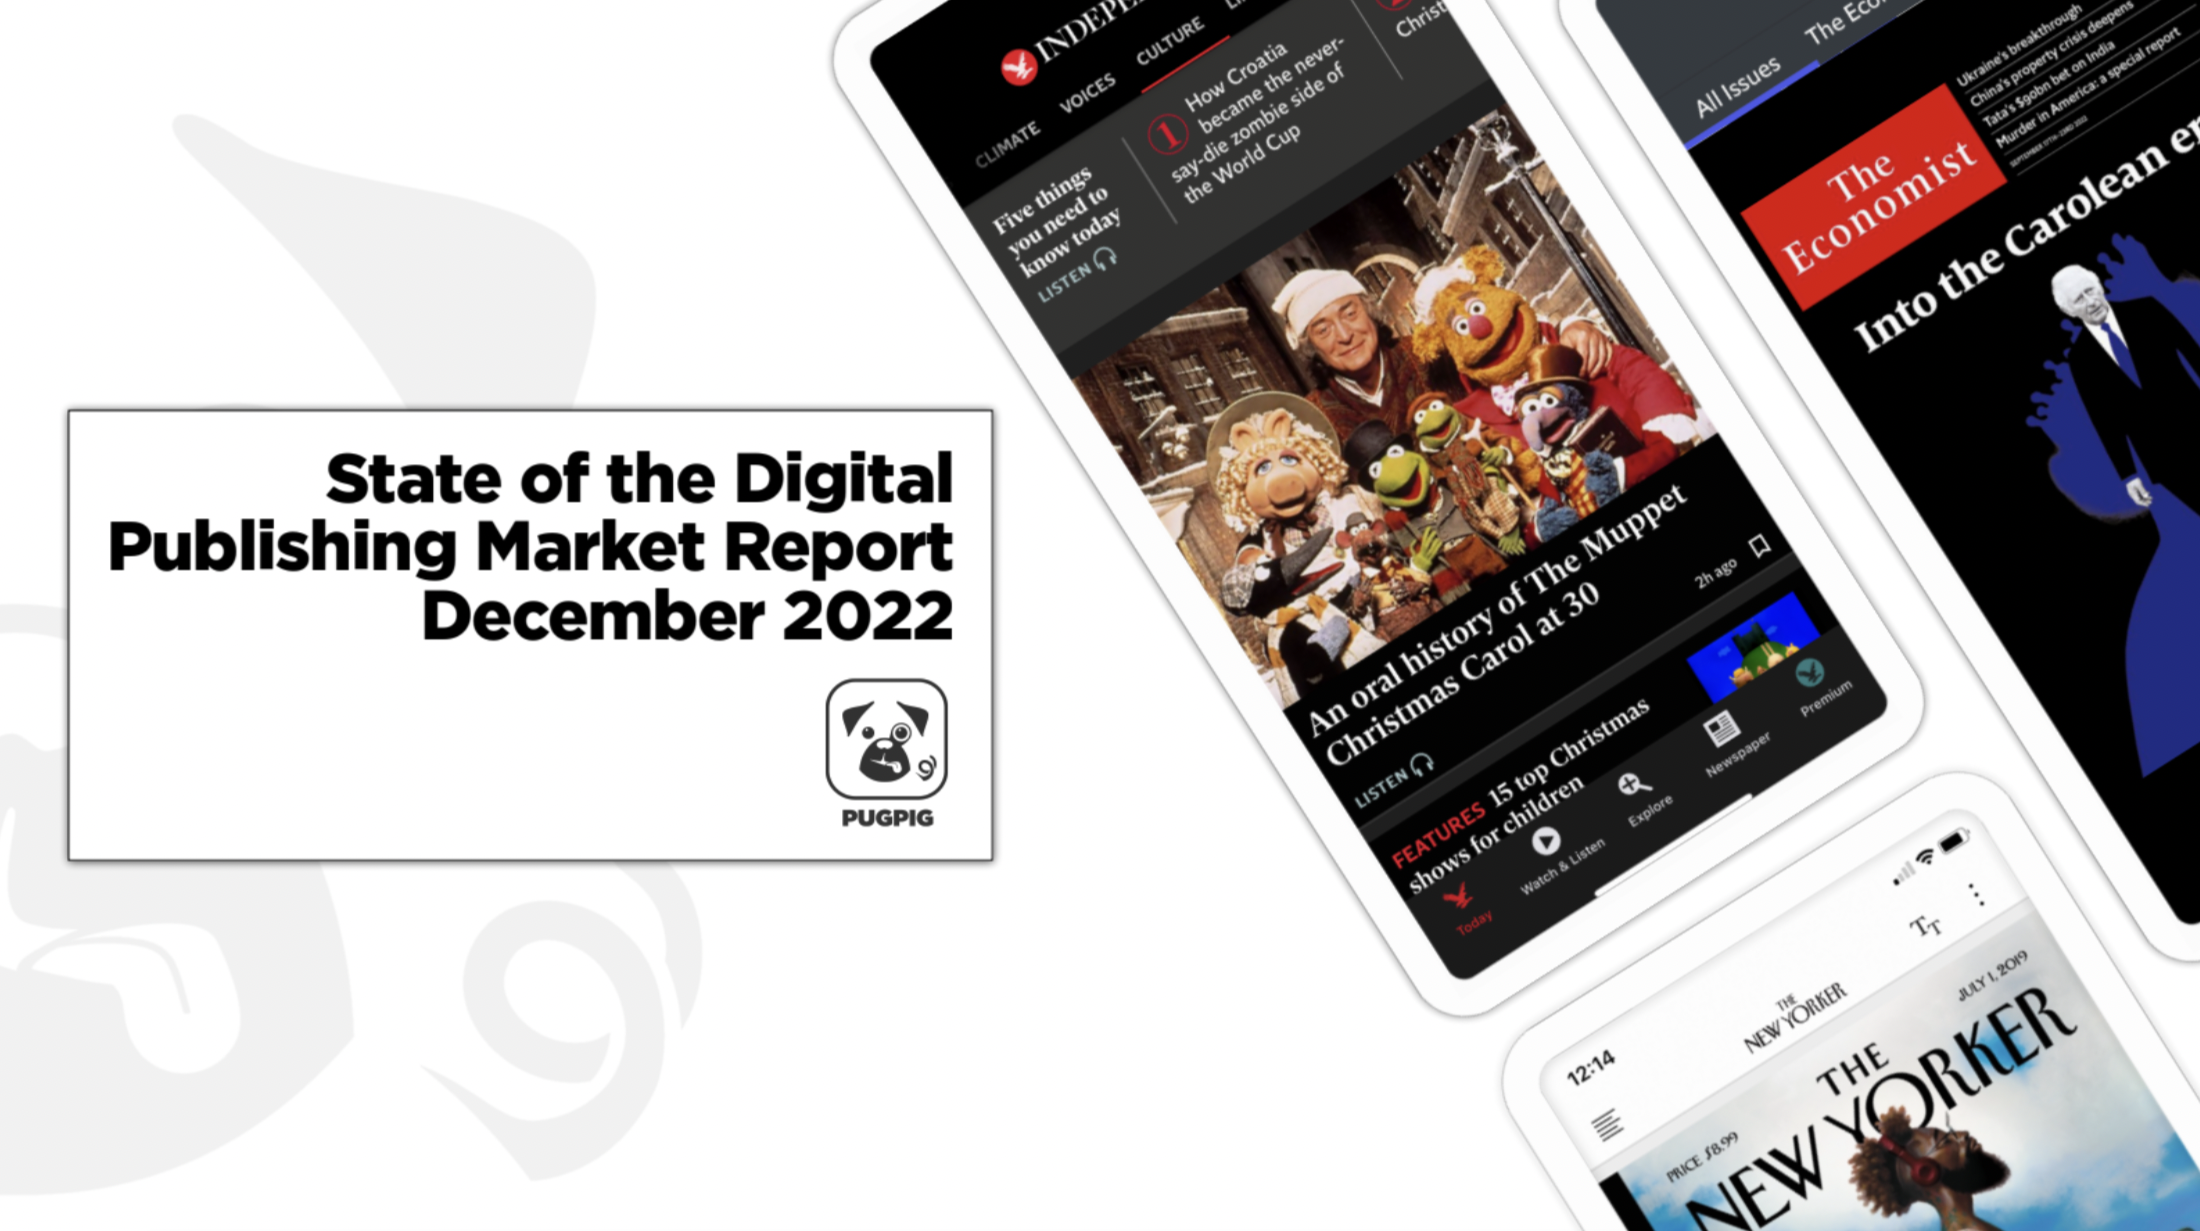 5 key findings from The State of Digital Publishing Market Report 2022